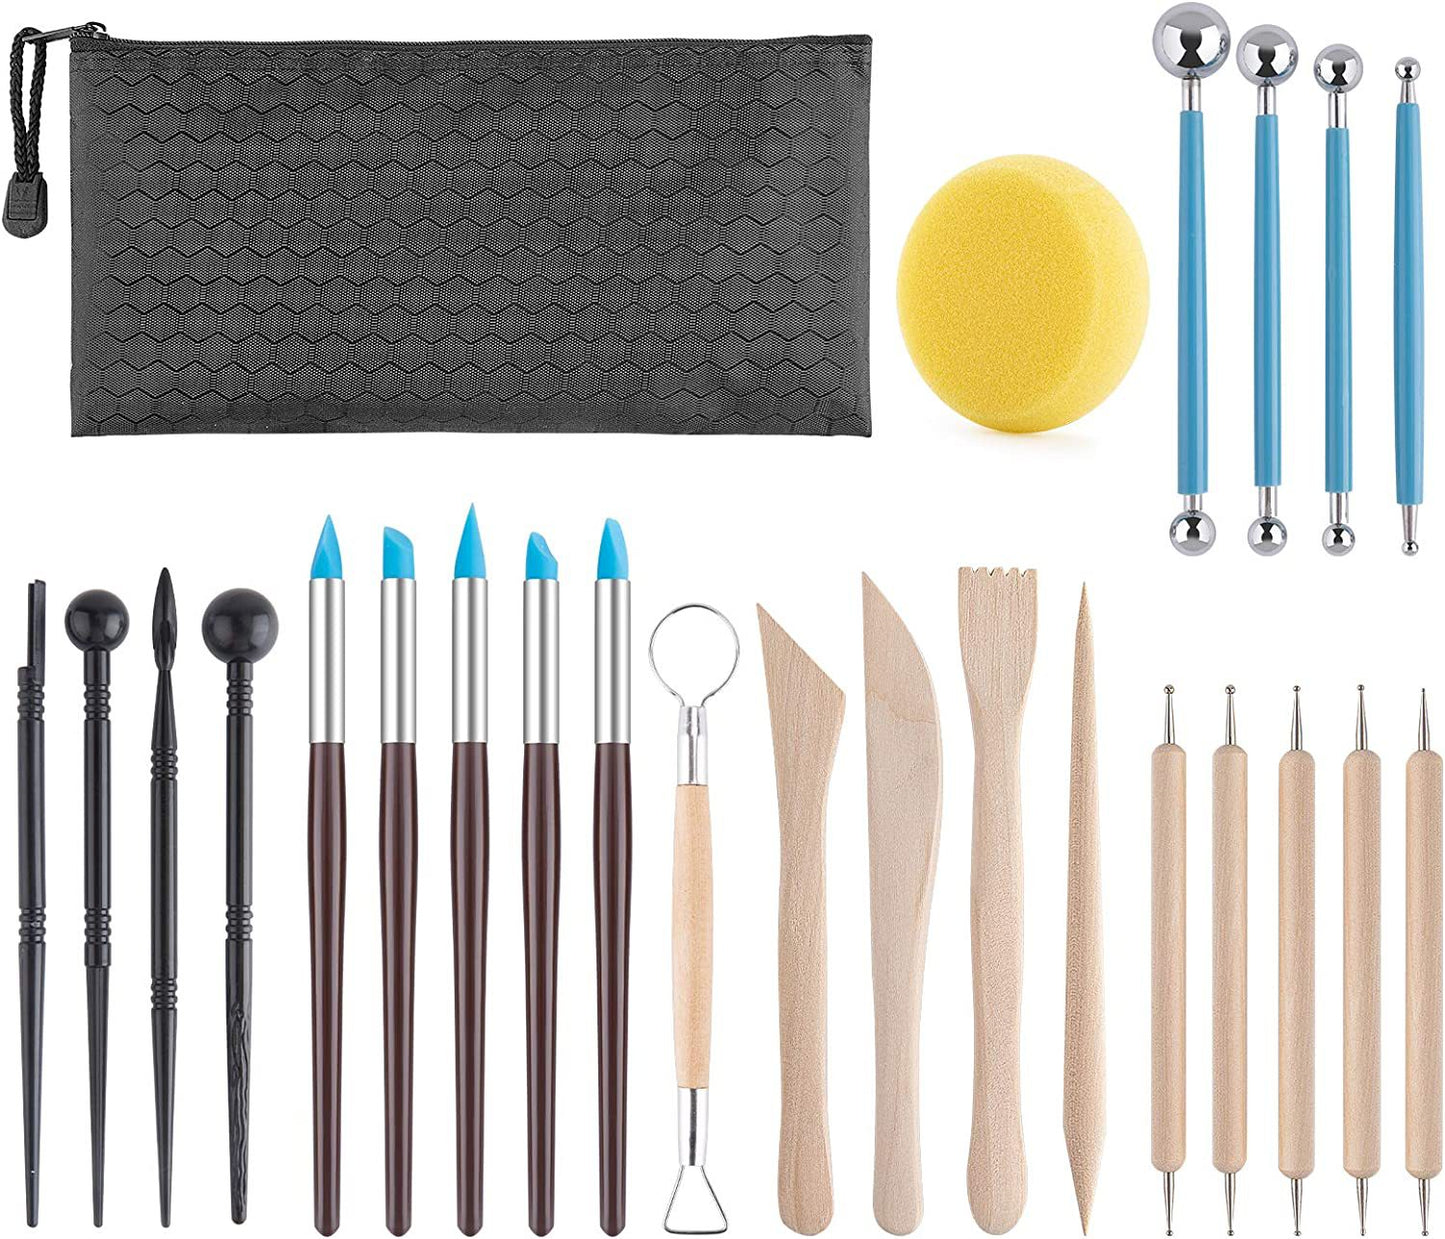 Resin Pick Bubble Trimming Tools Pottery Clay Sculpting Tools Set with Carrying Case Bag for Beginners